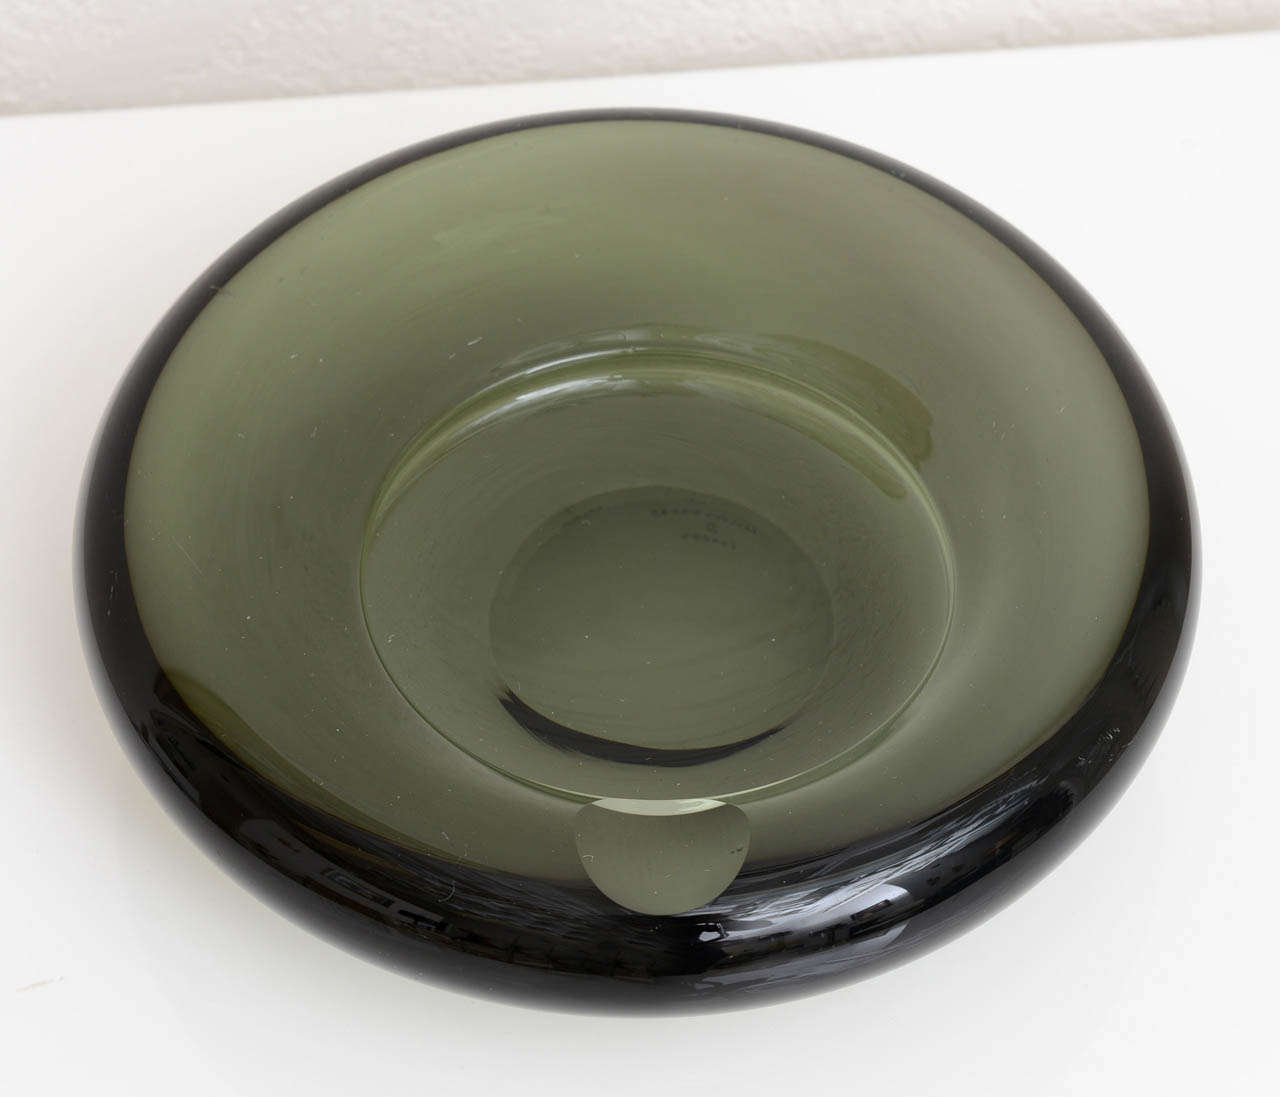 Stunning Mid Century glass ashtray by Per Lutken for Holmegaard.  Signed on underside. Reduced from $375.00.

Please feel free to contact us directly for a shipping quote or any additional information by clicking 